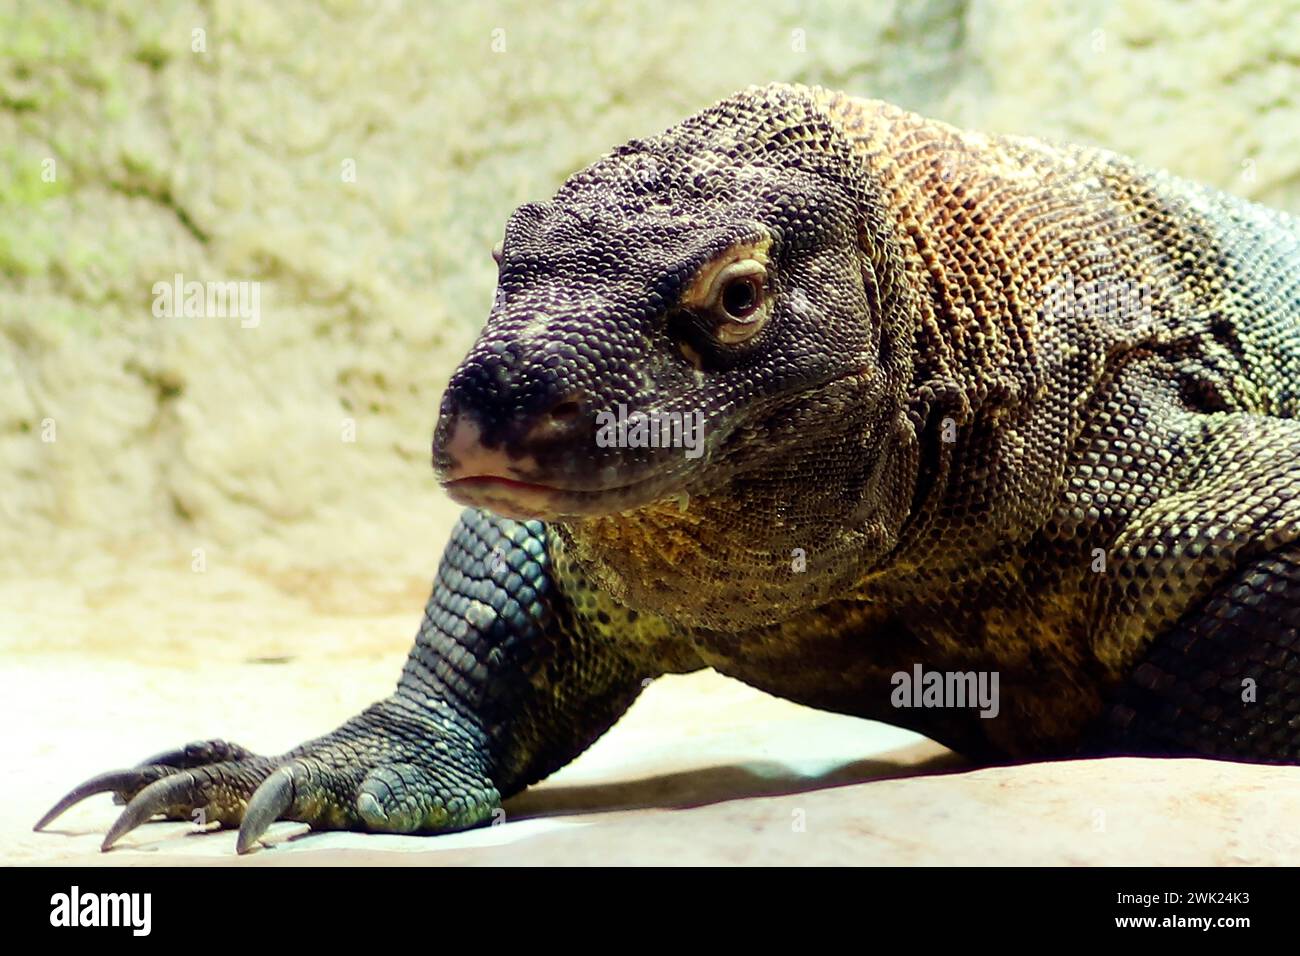 Komodo dragon, also known as the Komodo monitor, is a member of the monitor lizard family Varanidae that is endemic to the Indonesian islands Stock Photo